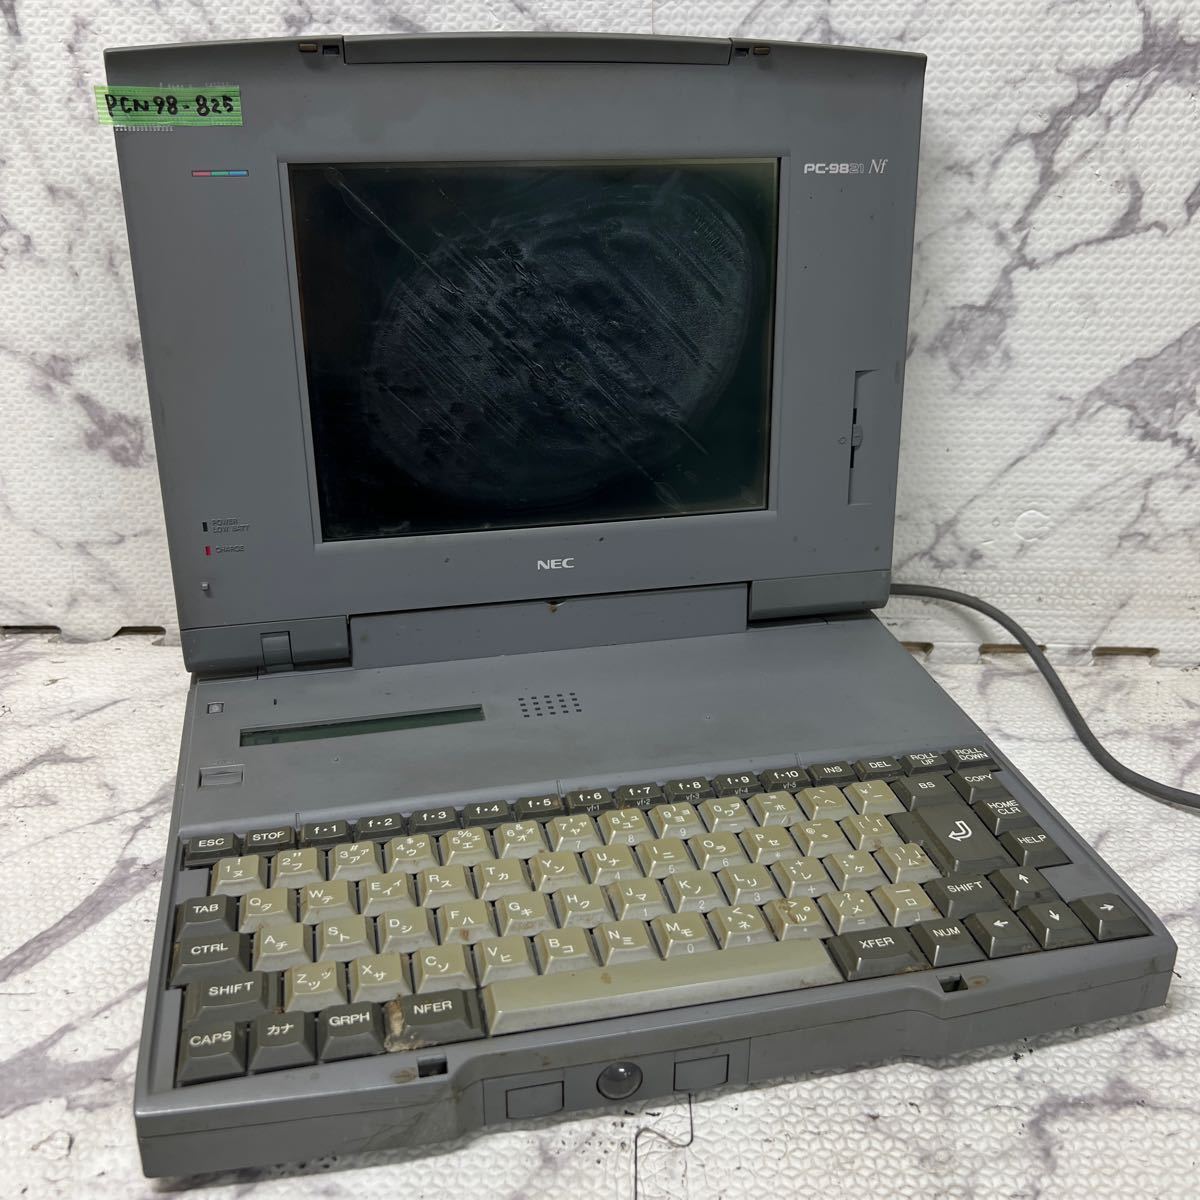 PCN98-825 super-discount PC98 notebook NEC PC-9821Nf/810W electrification only has confirmed Junk 